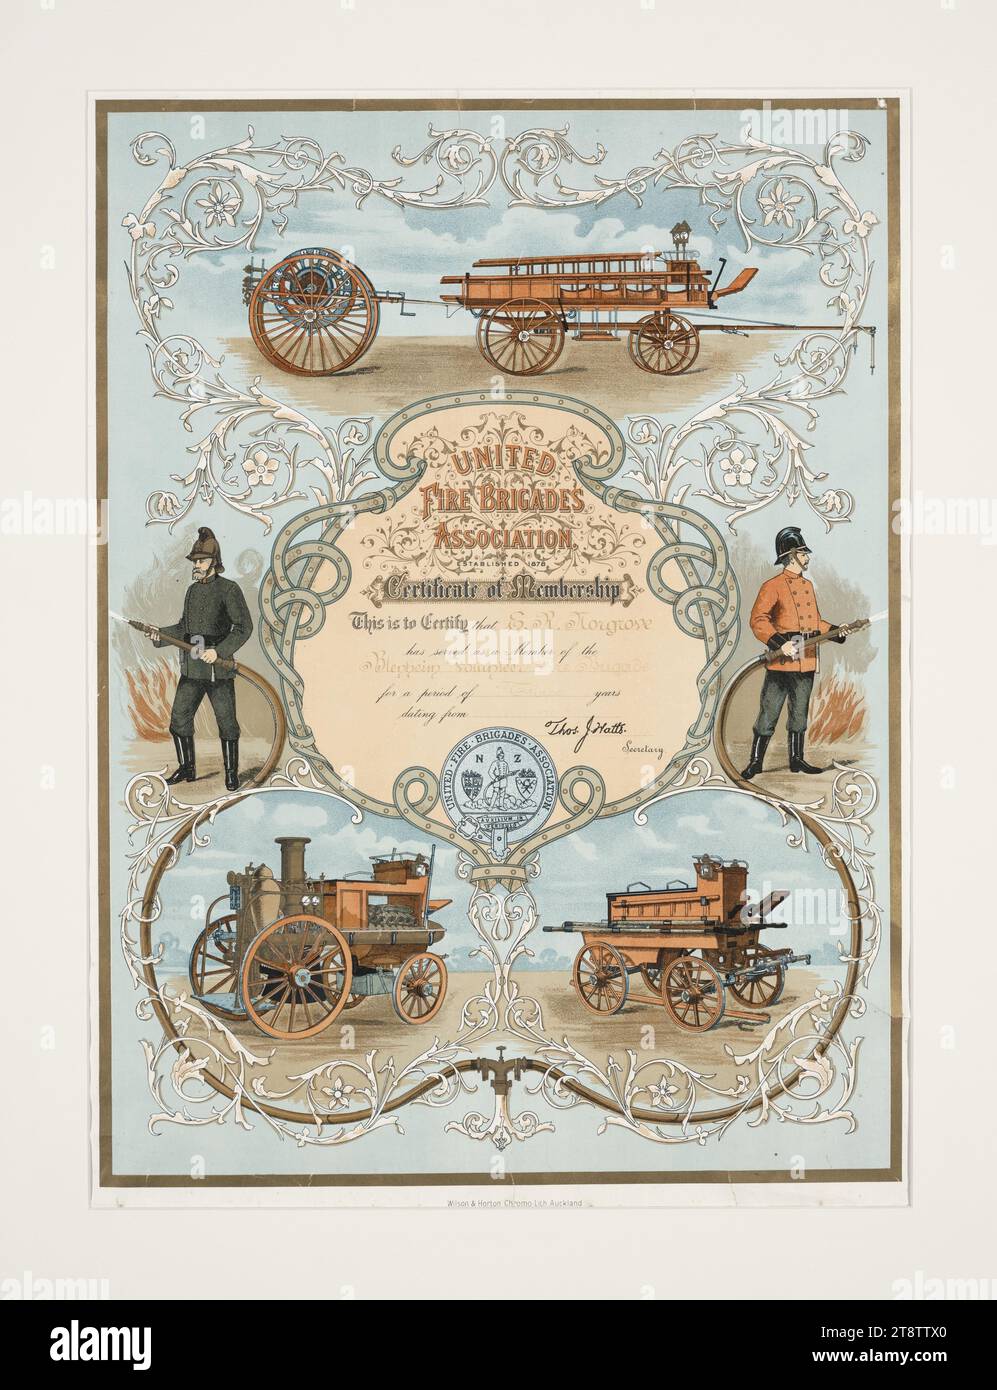 United Fire Brigades Association: Certificate of membership. This is to certify that E R Norgrove has served as a member of the Blenheim Volunteer Fire Brigade for a period of three years, dating from 8 August 1900. Wilson & Horton Chromo-lith, A, A brightly-coloured certificate showing at the top a fire cart with a trailer holding the hose; two firemen holding hoses, and two further models of fire engine (one a steam driven vehicle and one horse-drawn). The decorative border incorporates the hoses held by the firemen Stock Photo